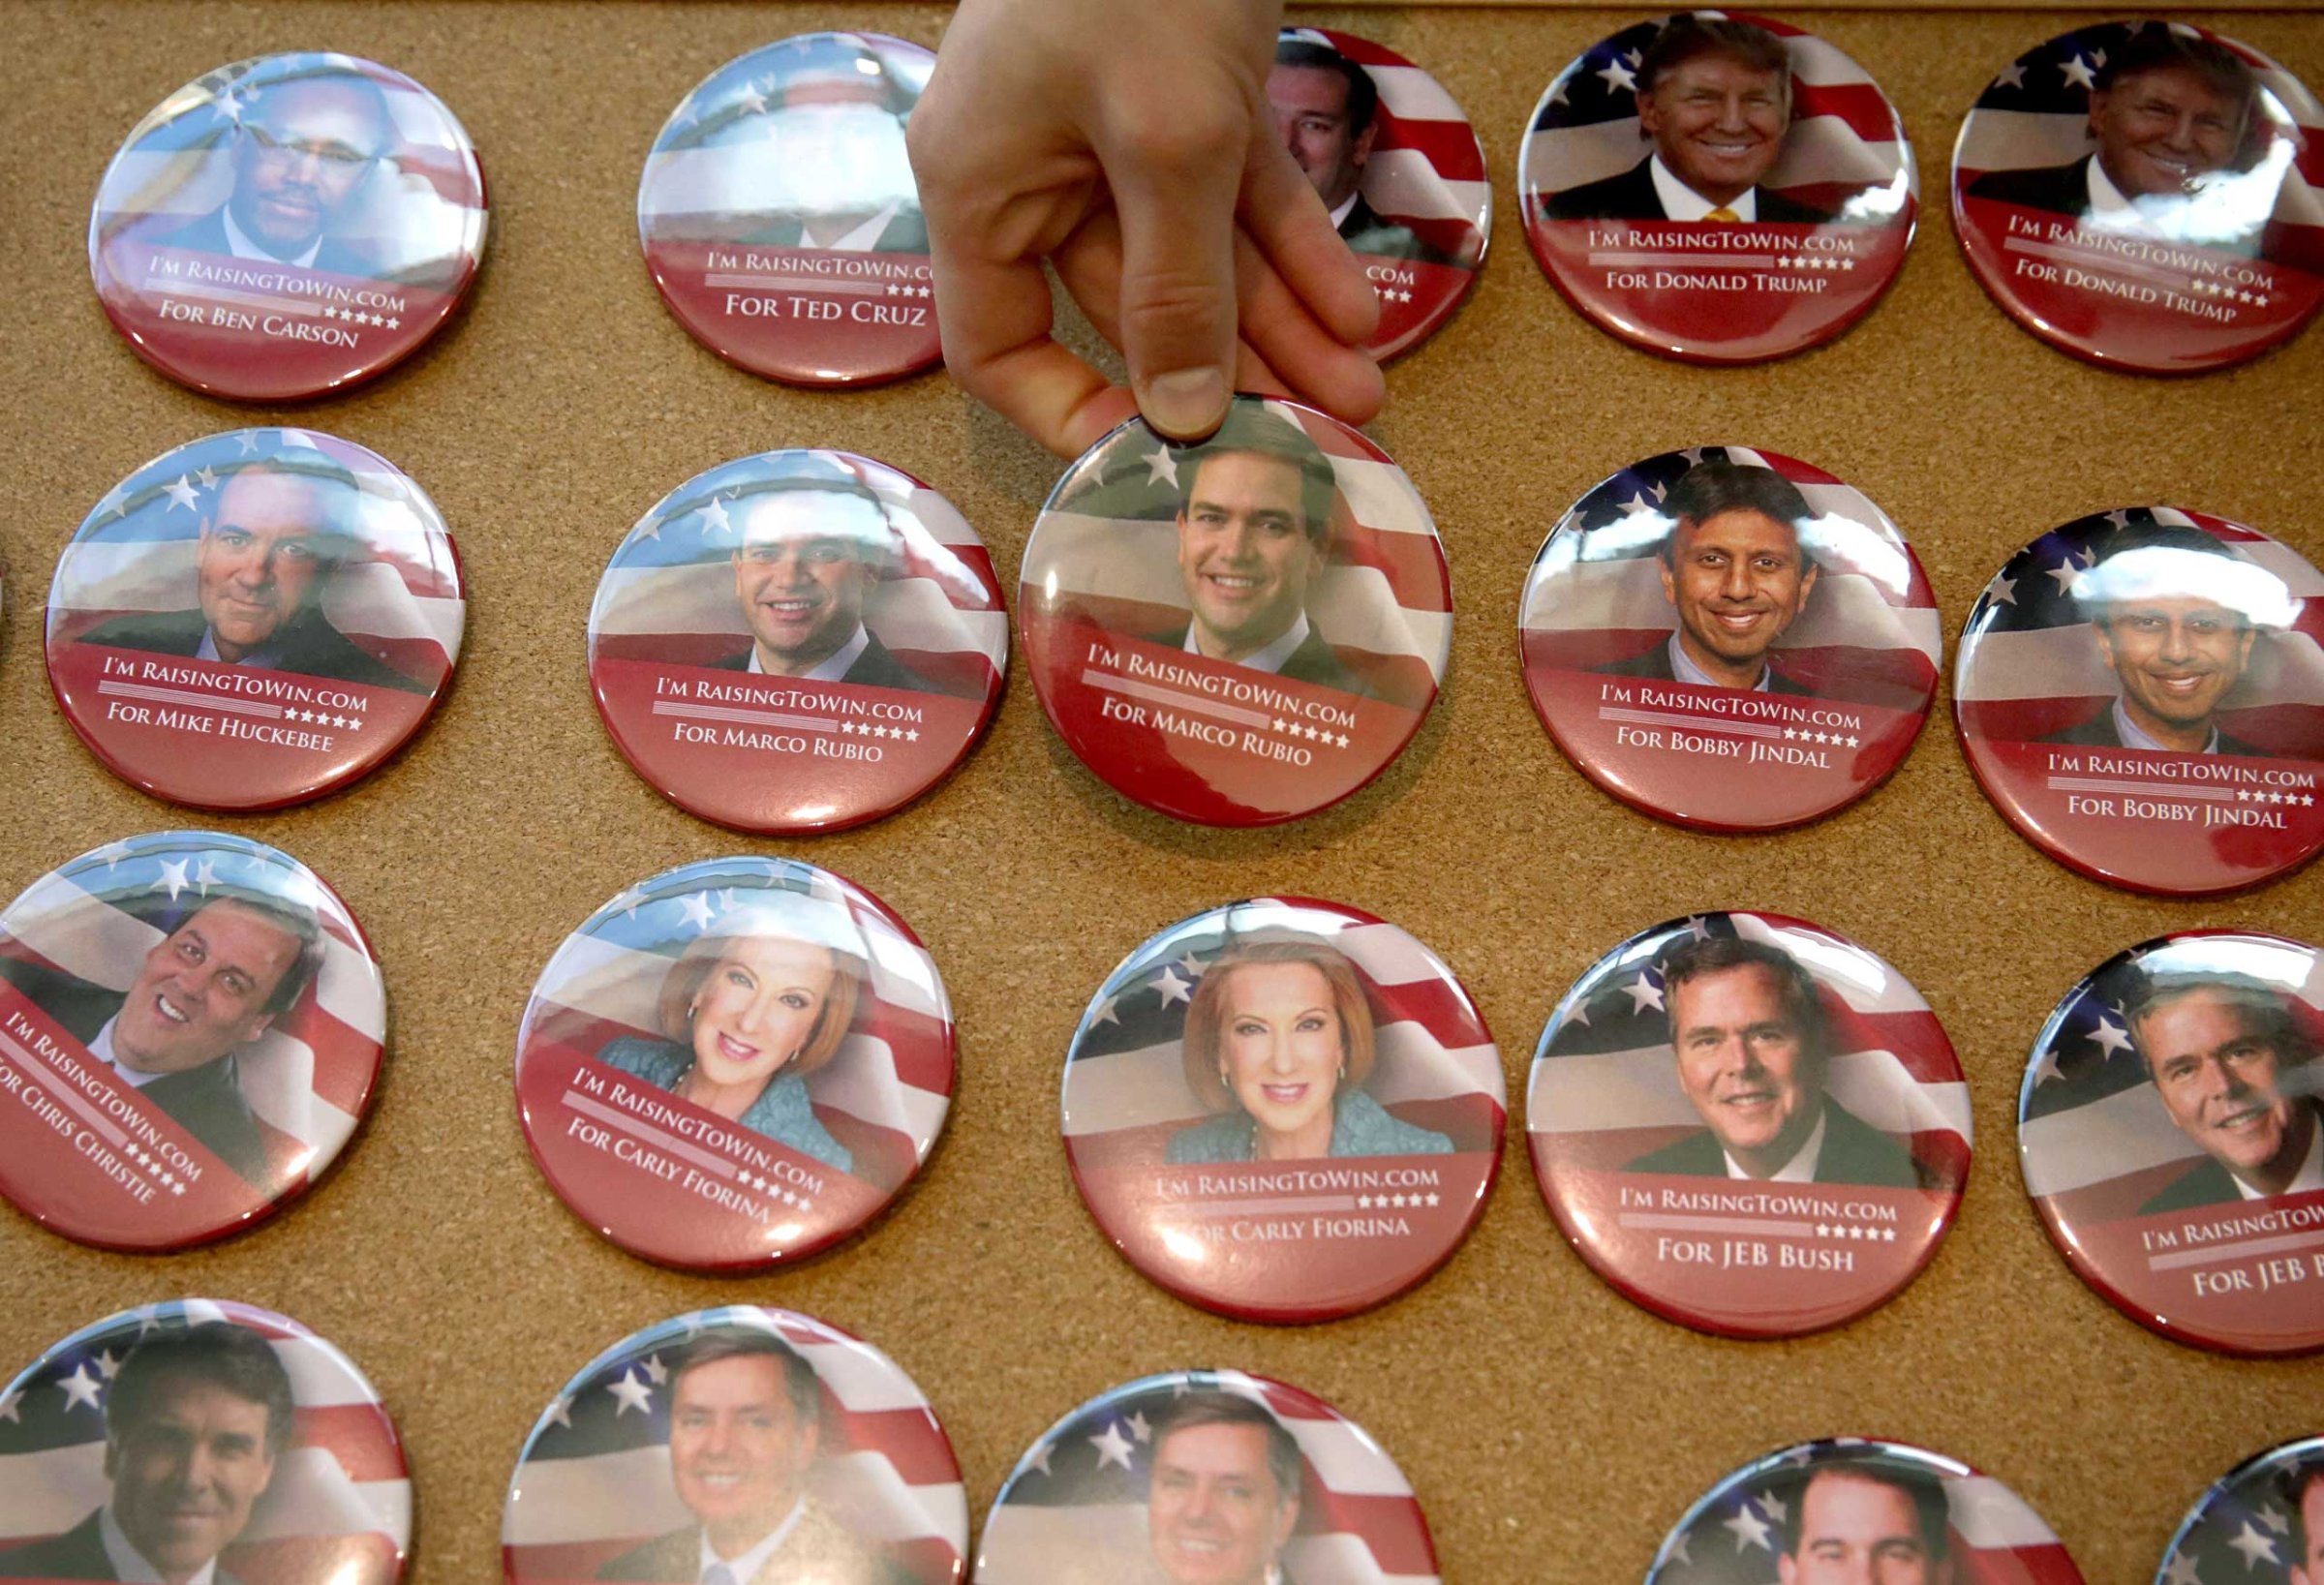 Buttons featuring Republican presidential hopefuls on display during the 2015 Southern Republican Leadership Conference in Oklahoma City on May 21, 2015.